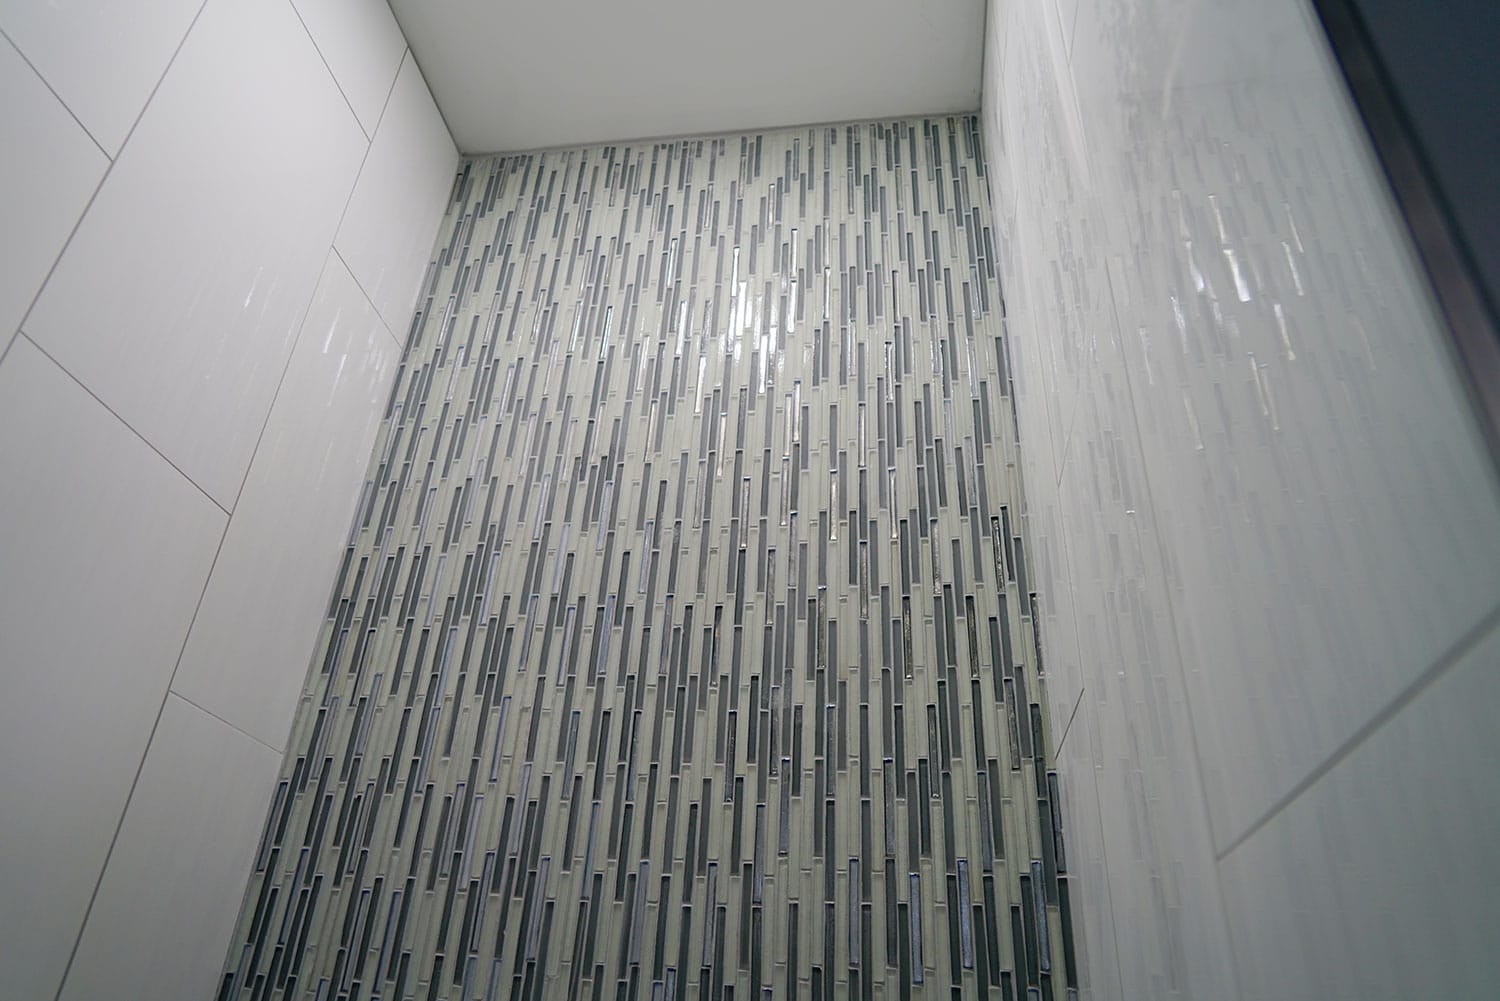 bathroom remodel with modern glass tile in shower